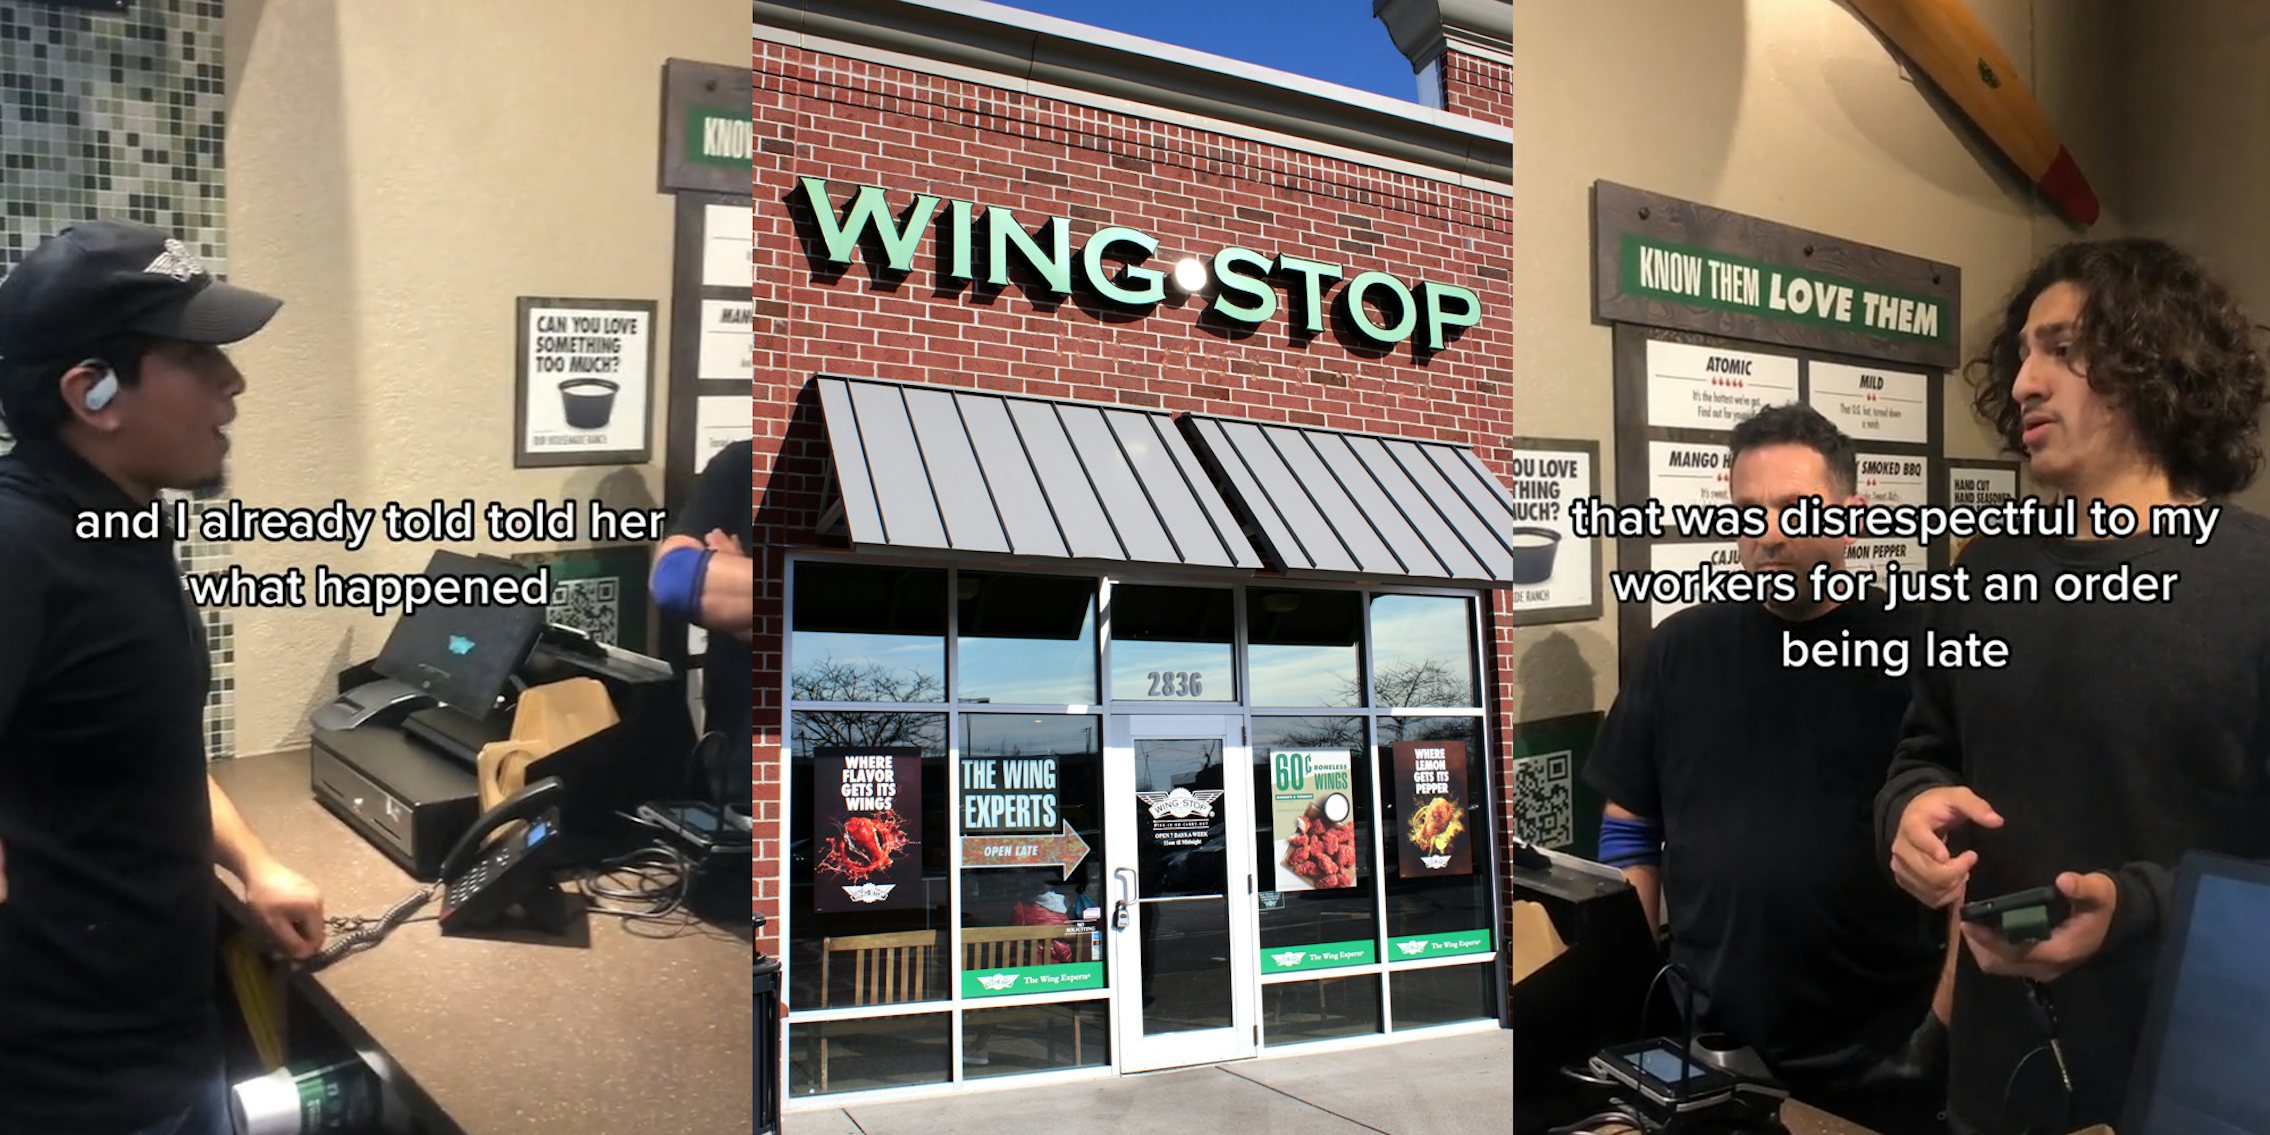 Wing Stop employee behind register speaking to DoorDash driver caption 'and I already told her what happened' (l) Wing Stop building with sign (c) DoorDash driver at register at Wing Stop caption 'that was disrespectful to my workers for just and order being late' (r)